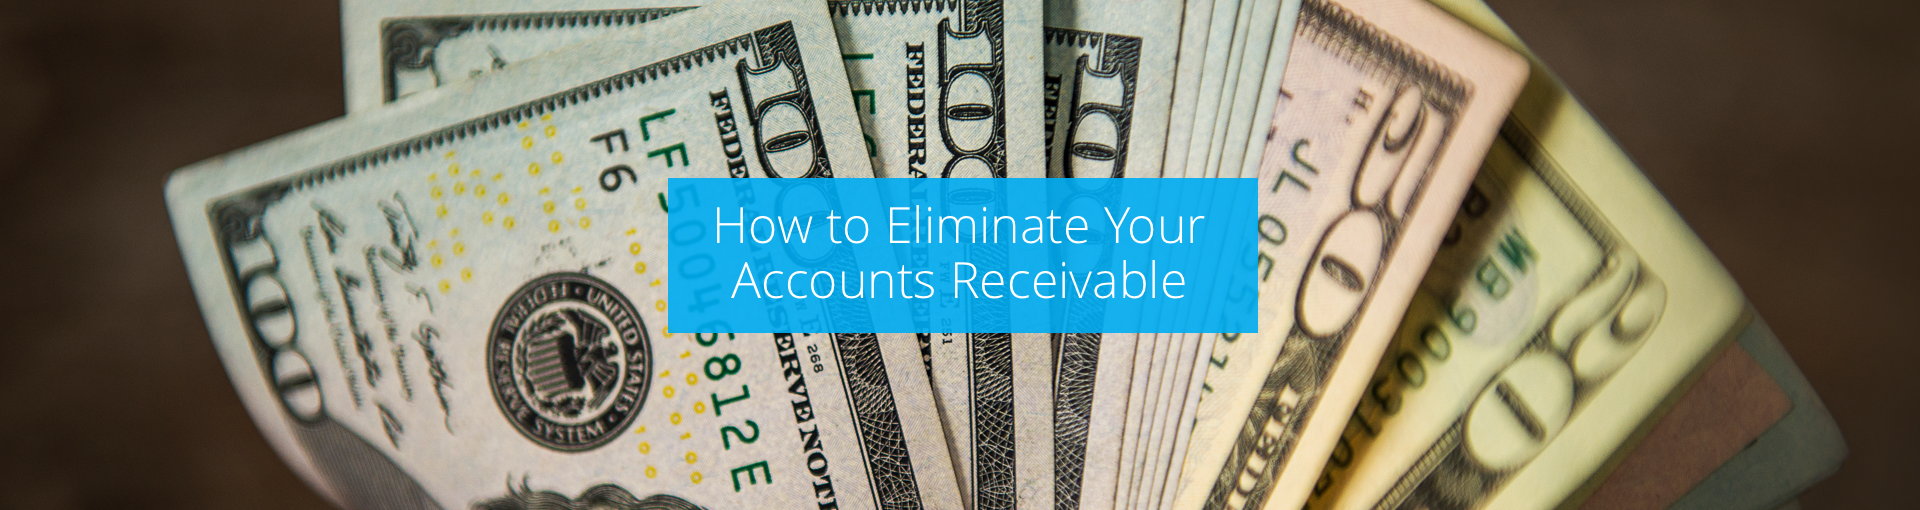 How to Eliminate Your Accounts Receivable Featured Image